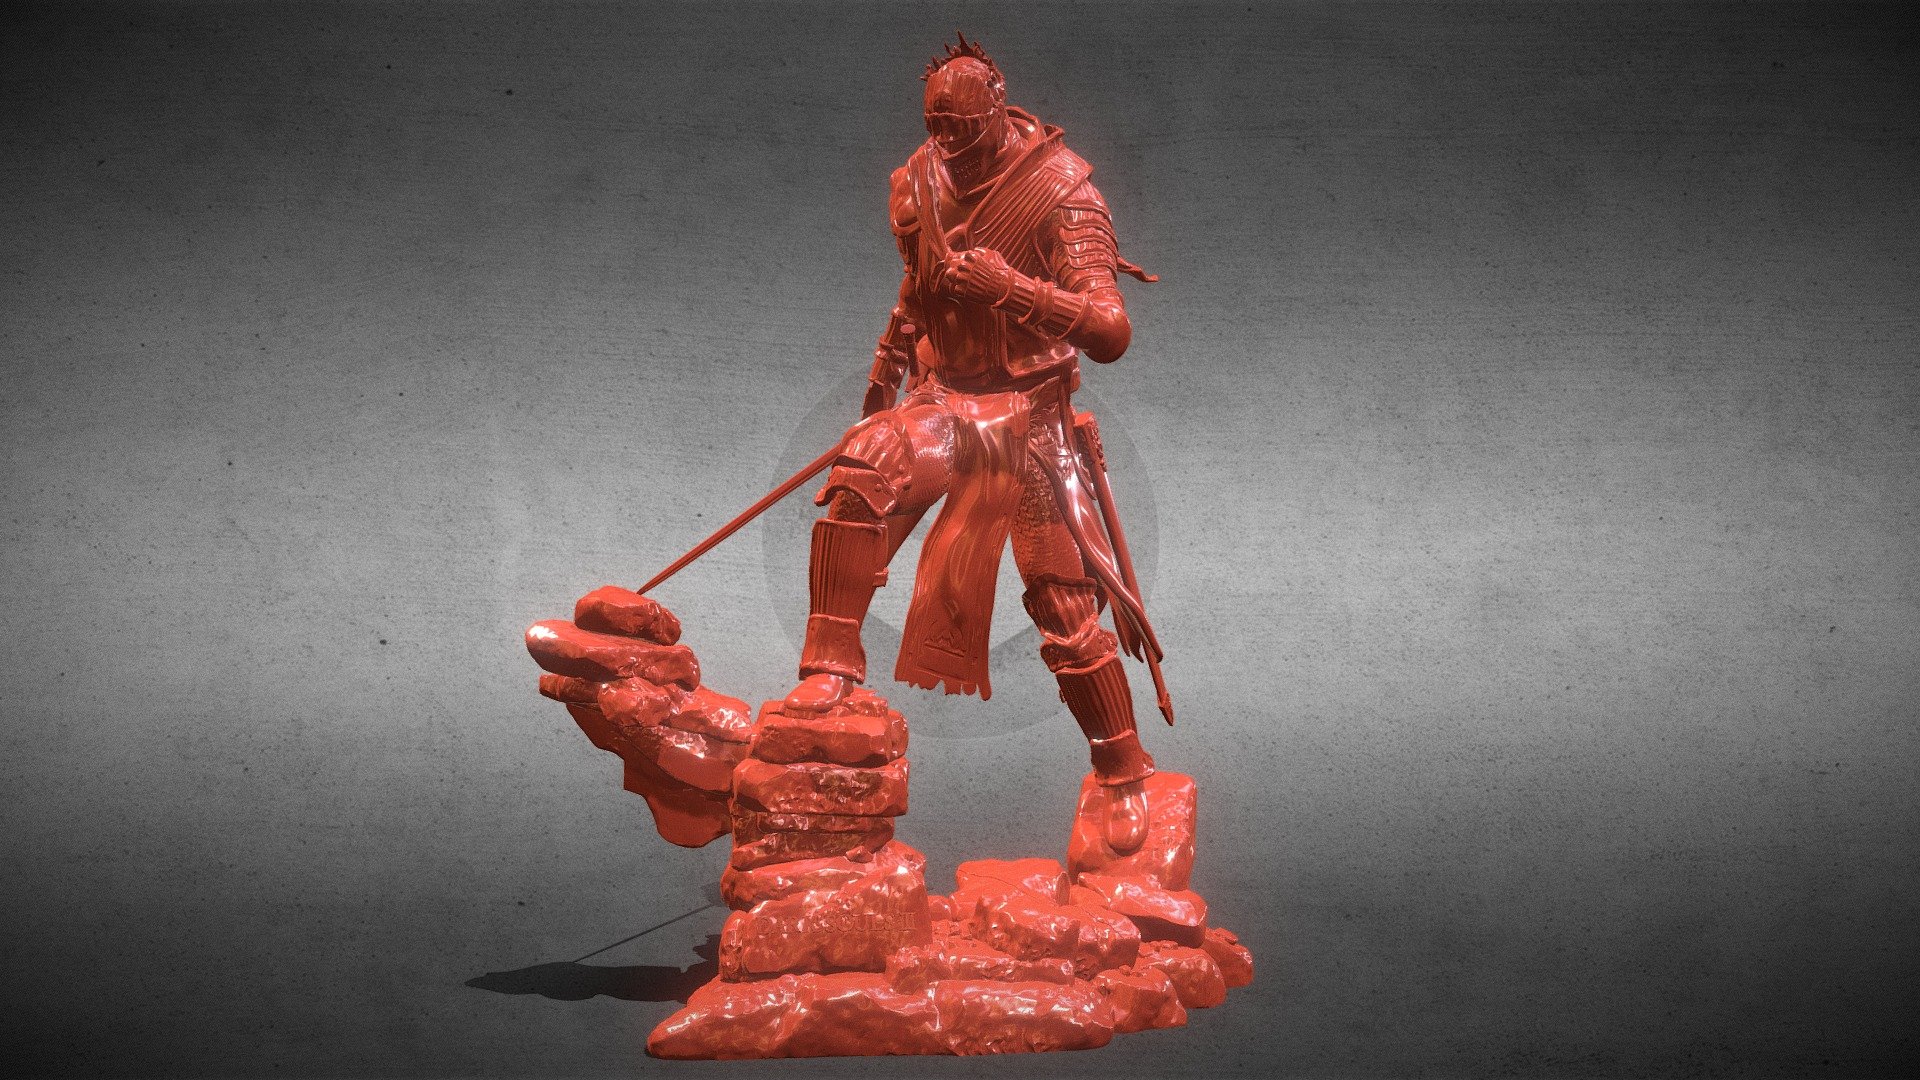 A sculpture of Dark souls 3 souls of cinder fan art ready for 3d print I separated each part for easy 3d print I included the STL, OBJ, and ZBrush Tool if you need 3D Game Assets or STL files I can do commission works 3d model